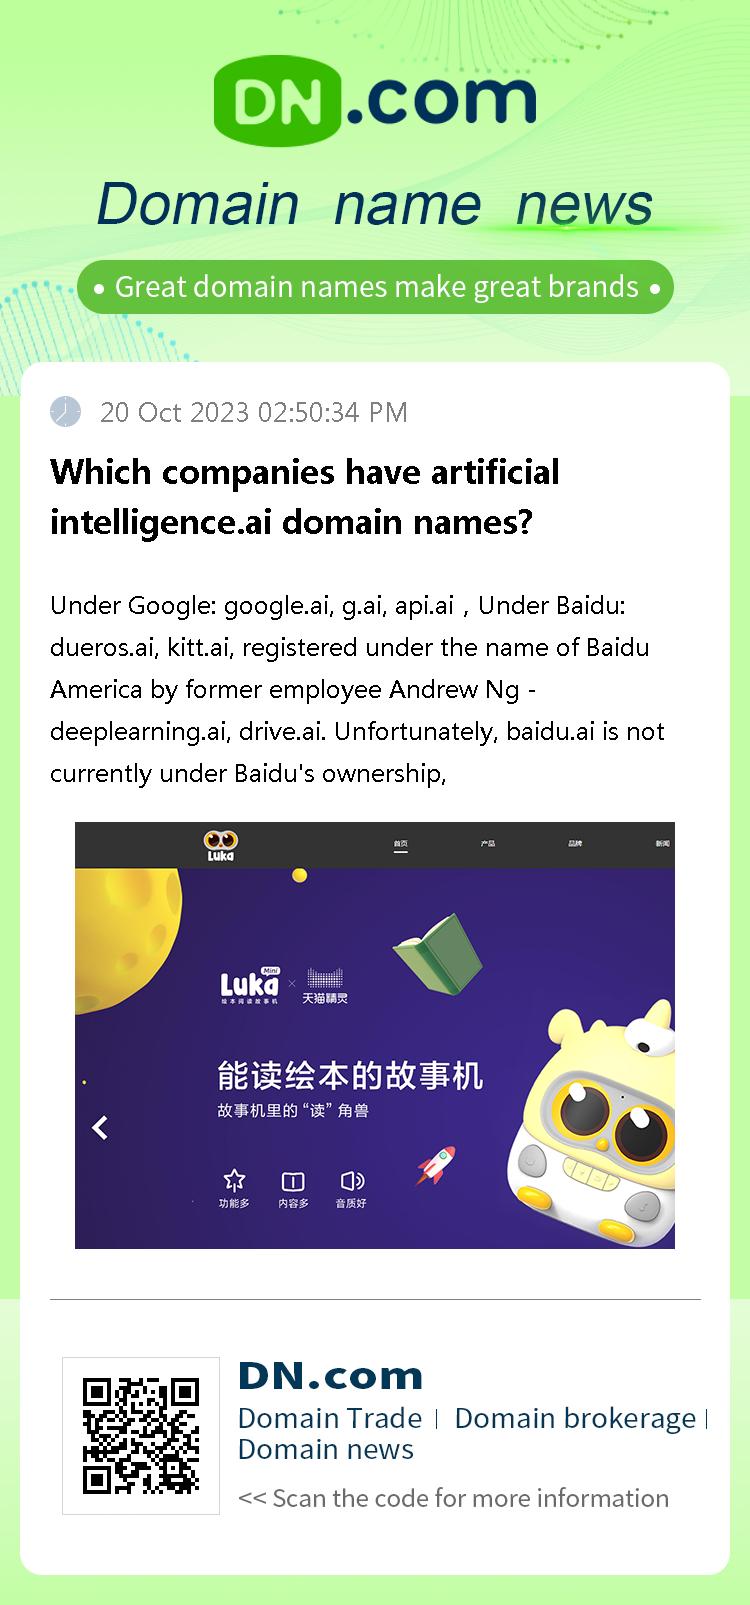 Which companies have artificial intelligence.ai domain names?